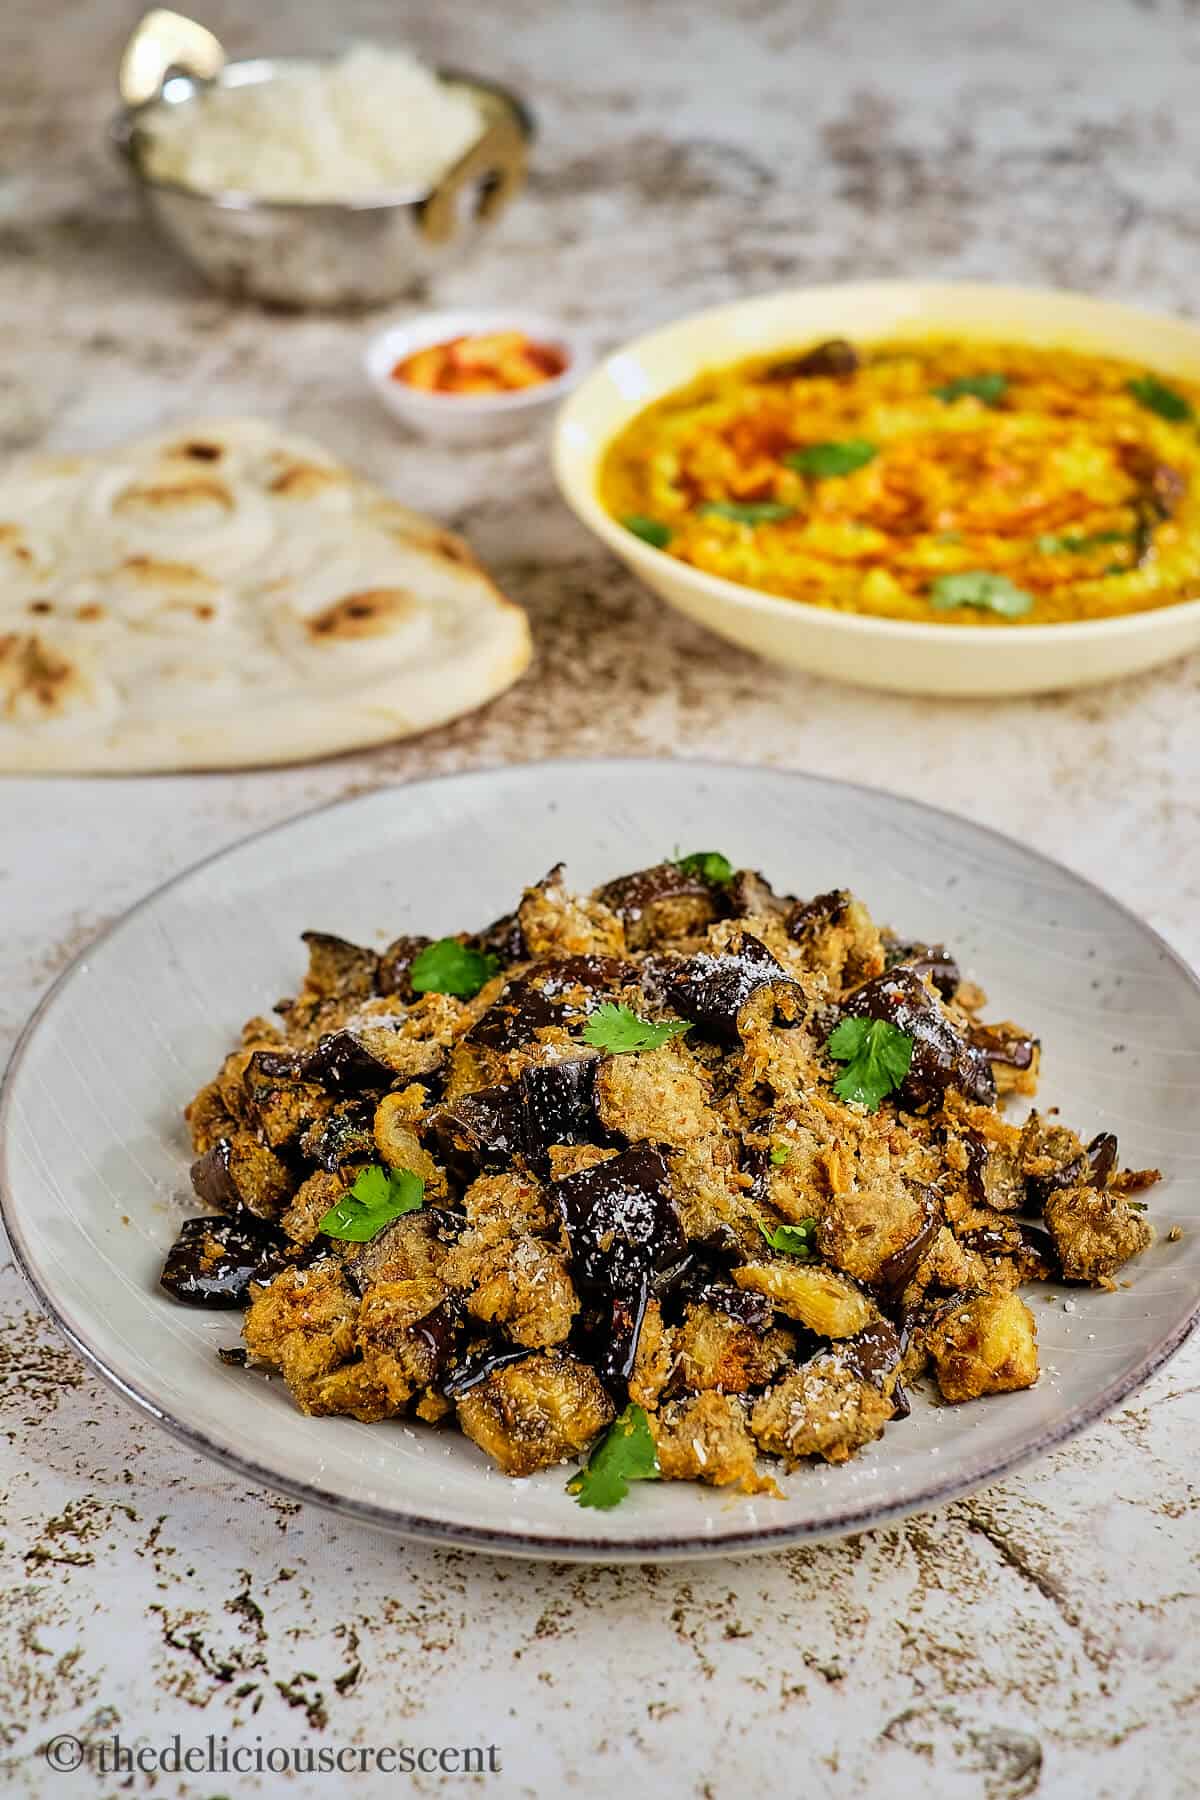 Oven roasted Indian style eggplant served with dal.